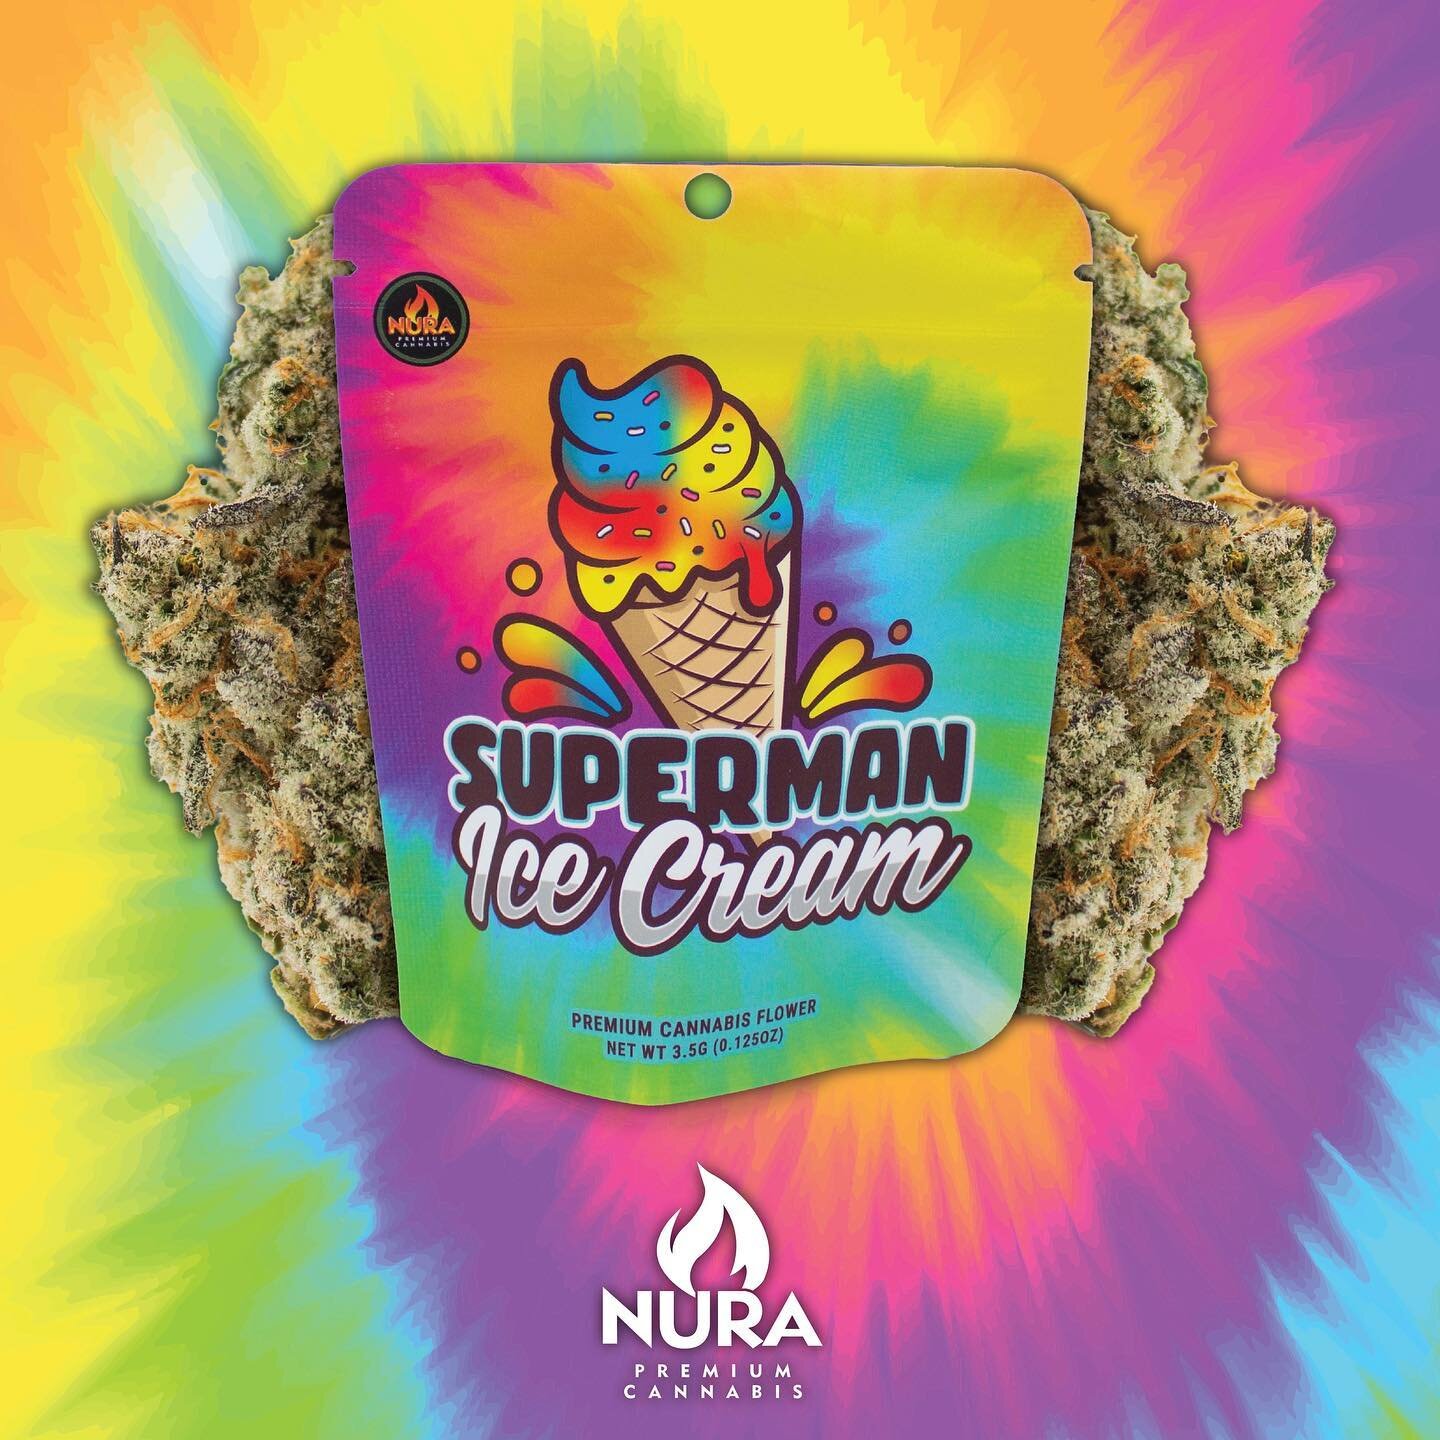 Fly high with Superman Ice Cream, one of our favorites! 🍦

NOTHING FOR SALE. EDUCATIONAL PURPOSES ONLY. 21+